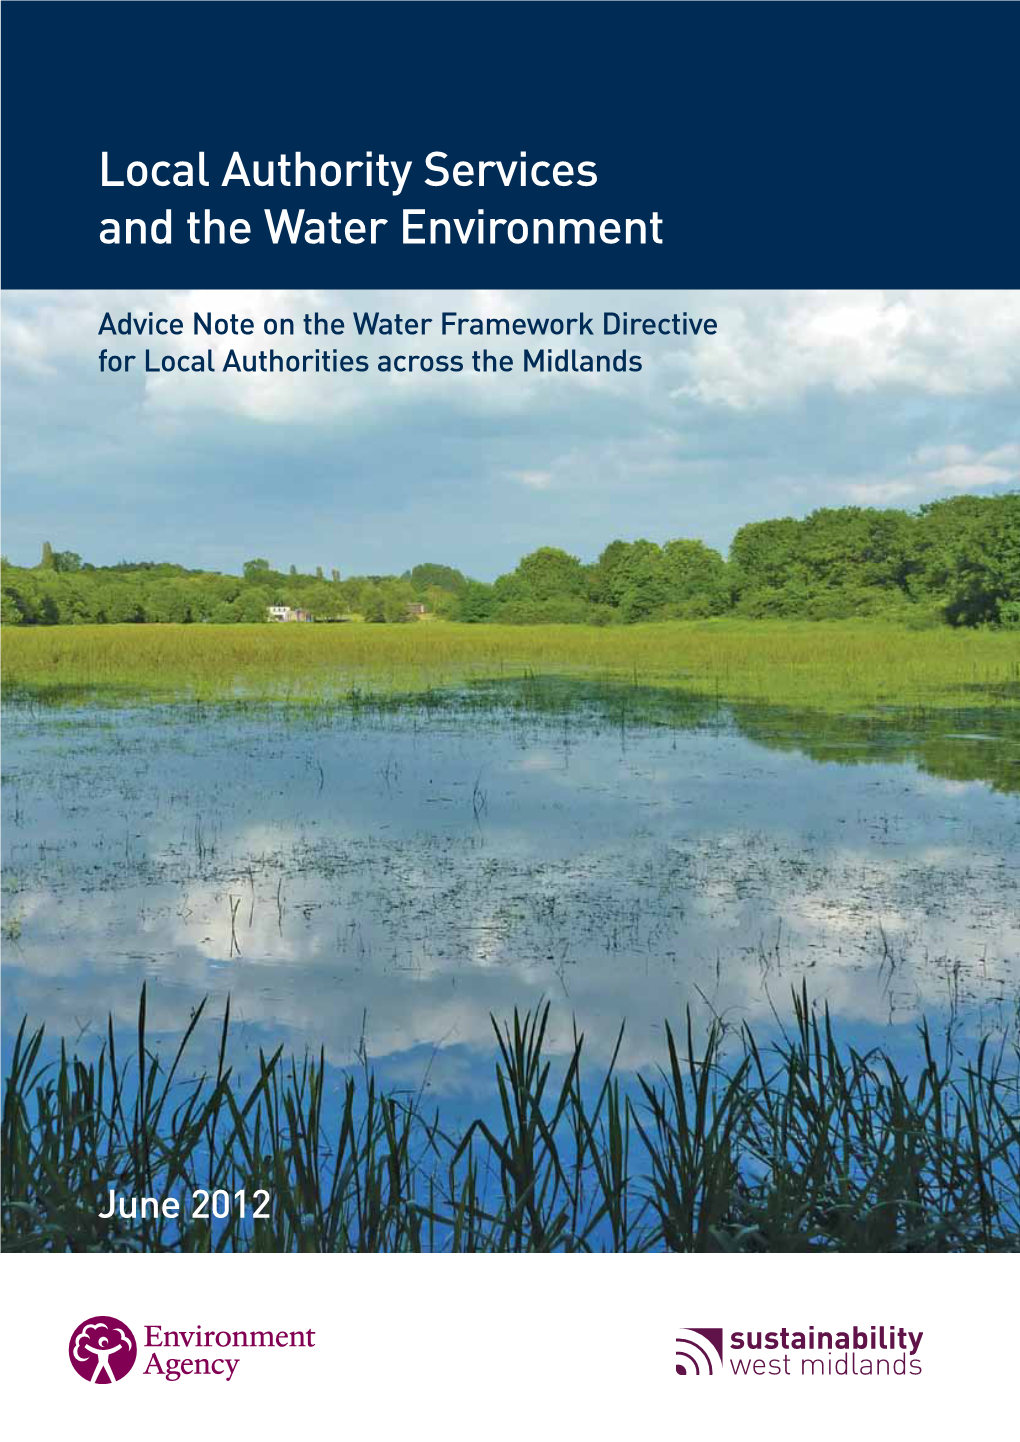 Local Authority Services and the Water Environment